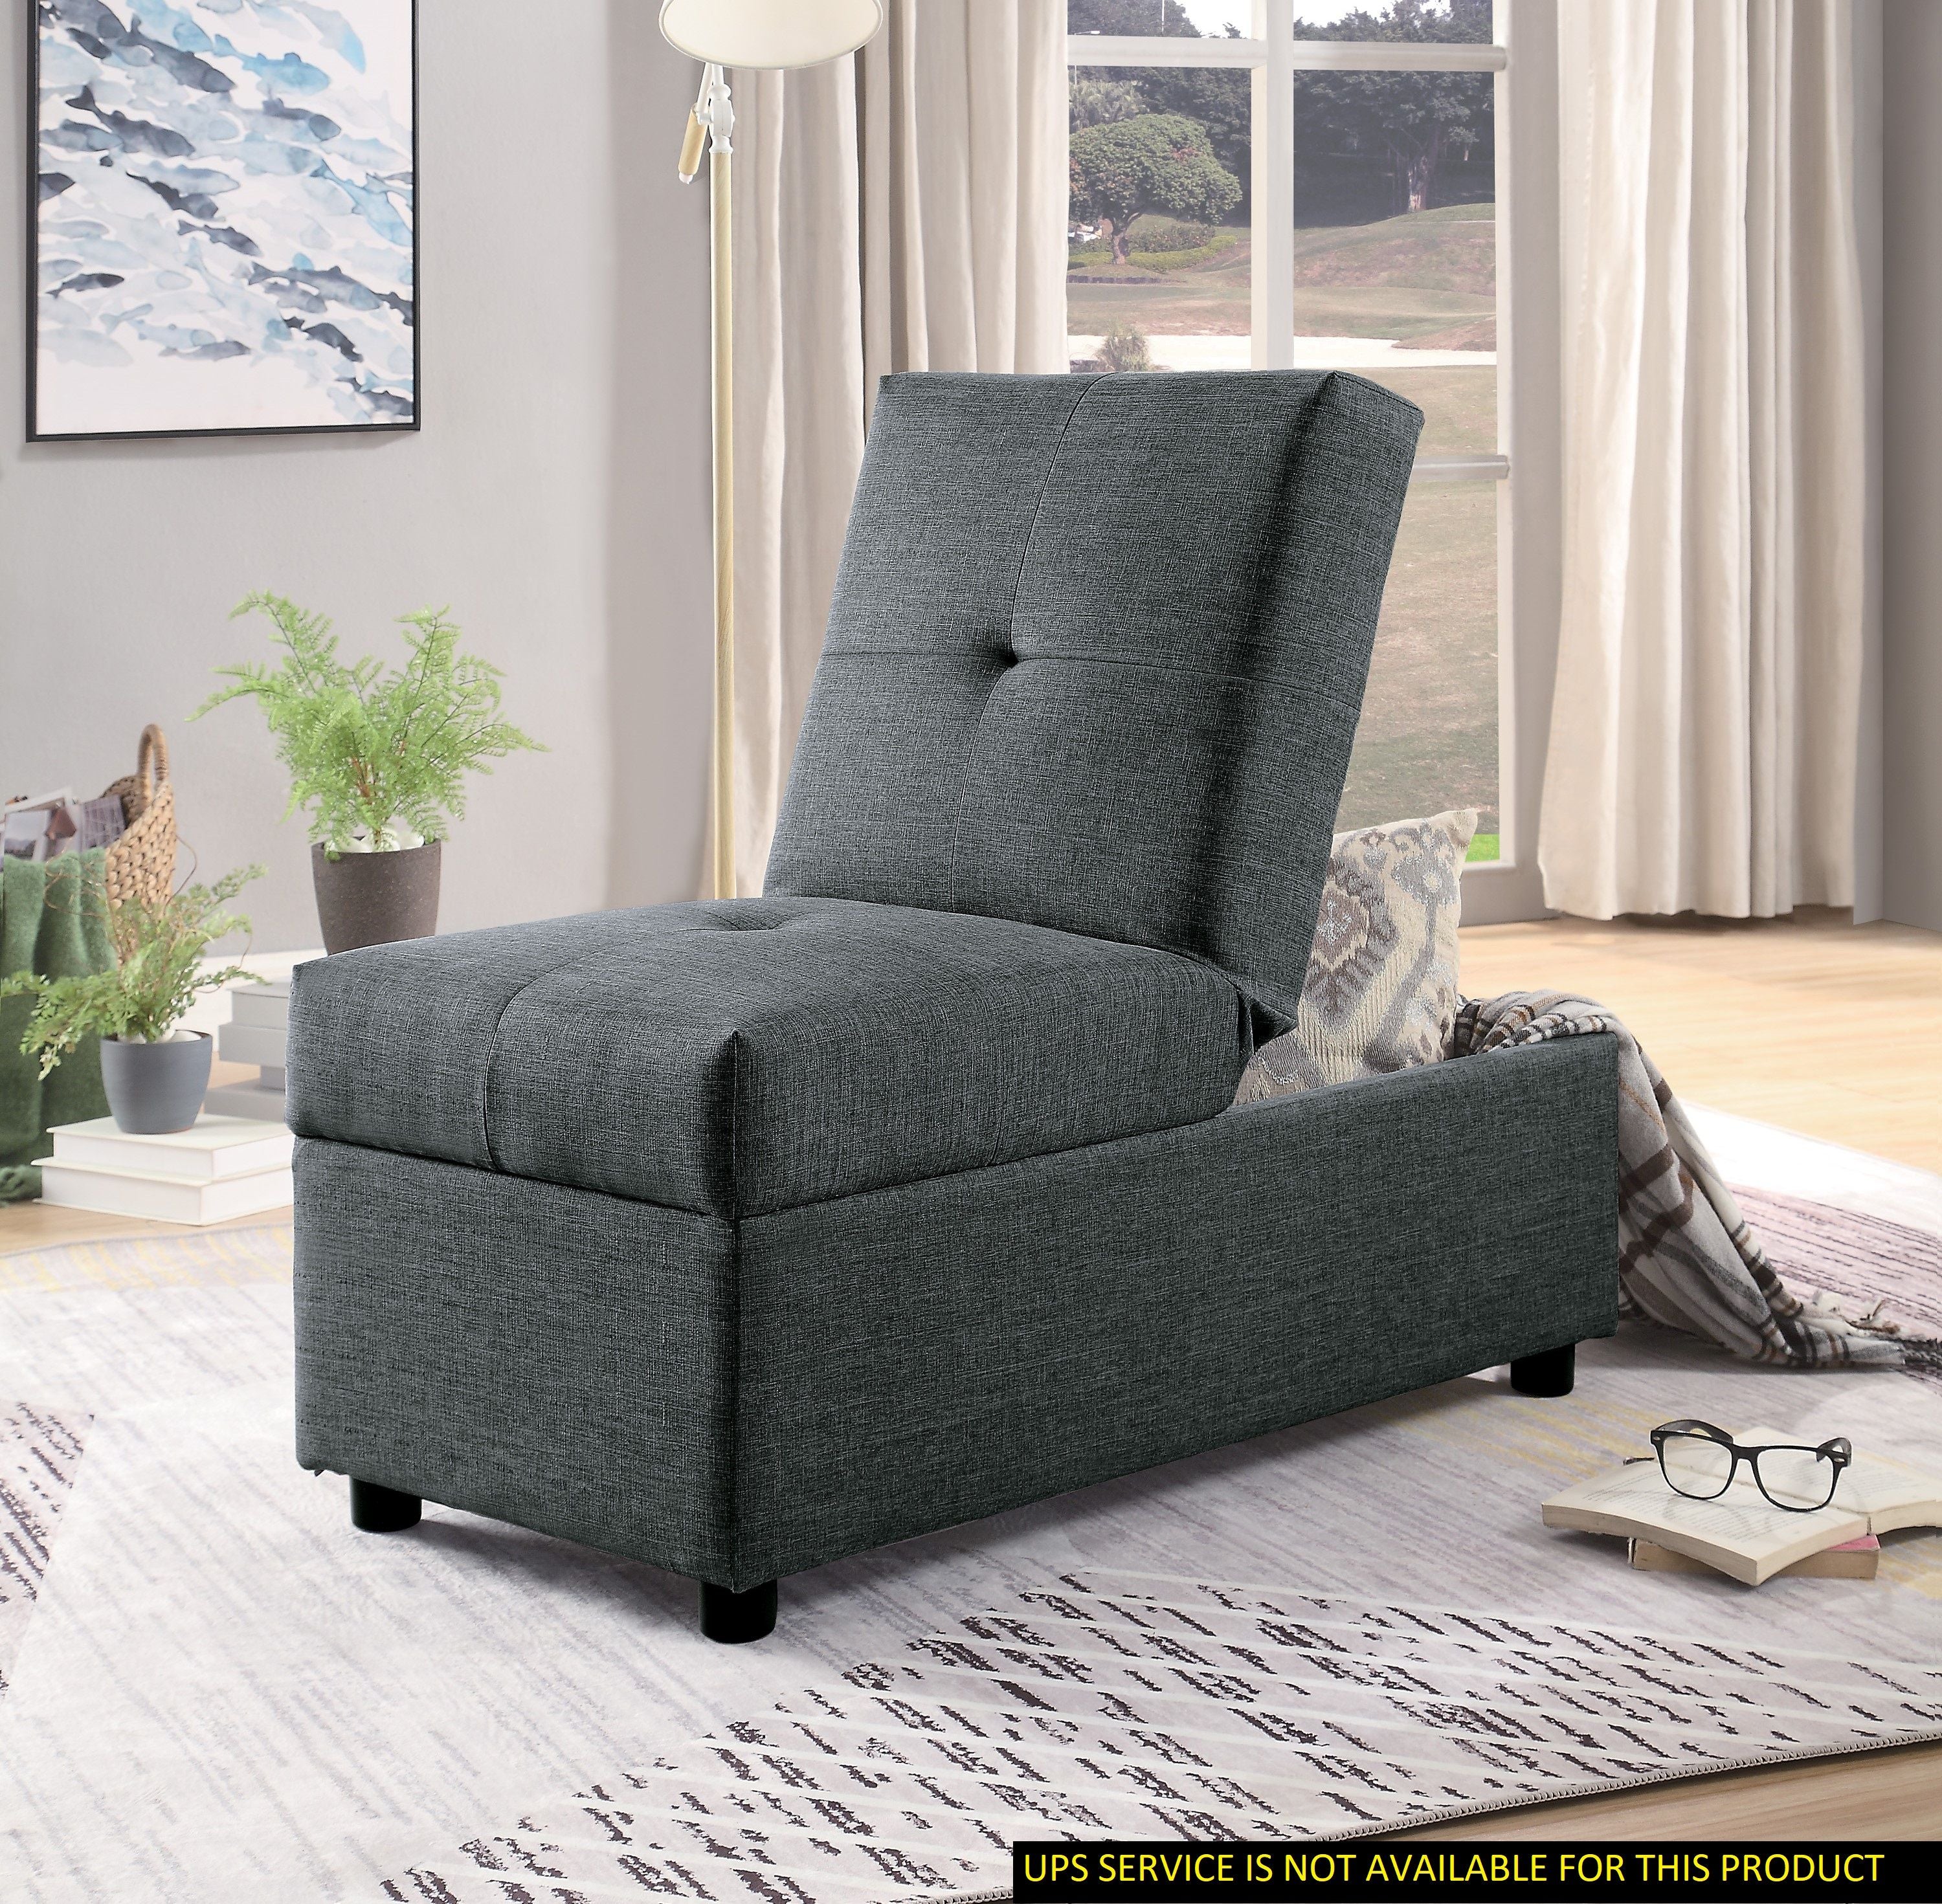 Gray Color Stylish 1 Piece Storage Ottoman Convertible Chair Foam Cushioned Fabric Upholstered Solid Wood Plywood Frame Living Room Furniture